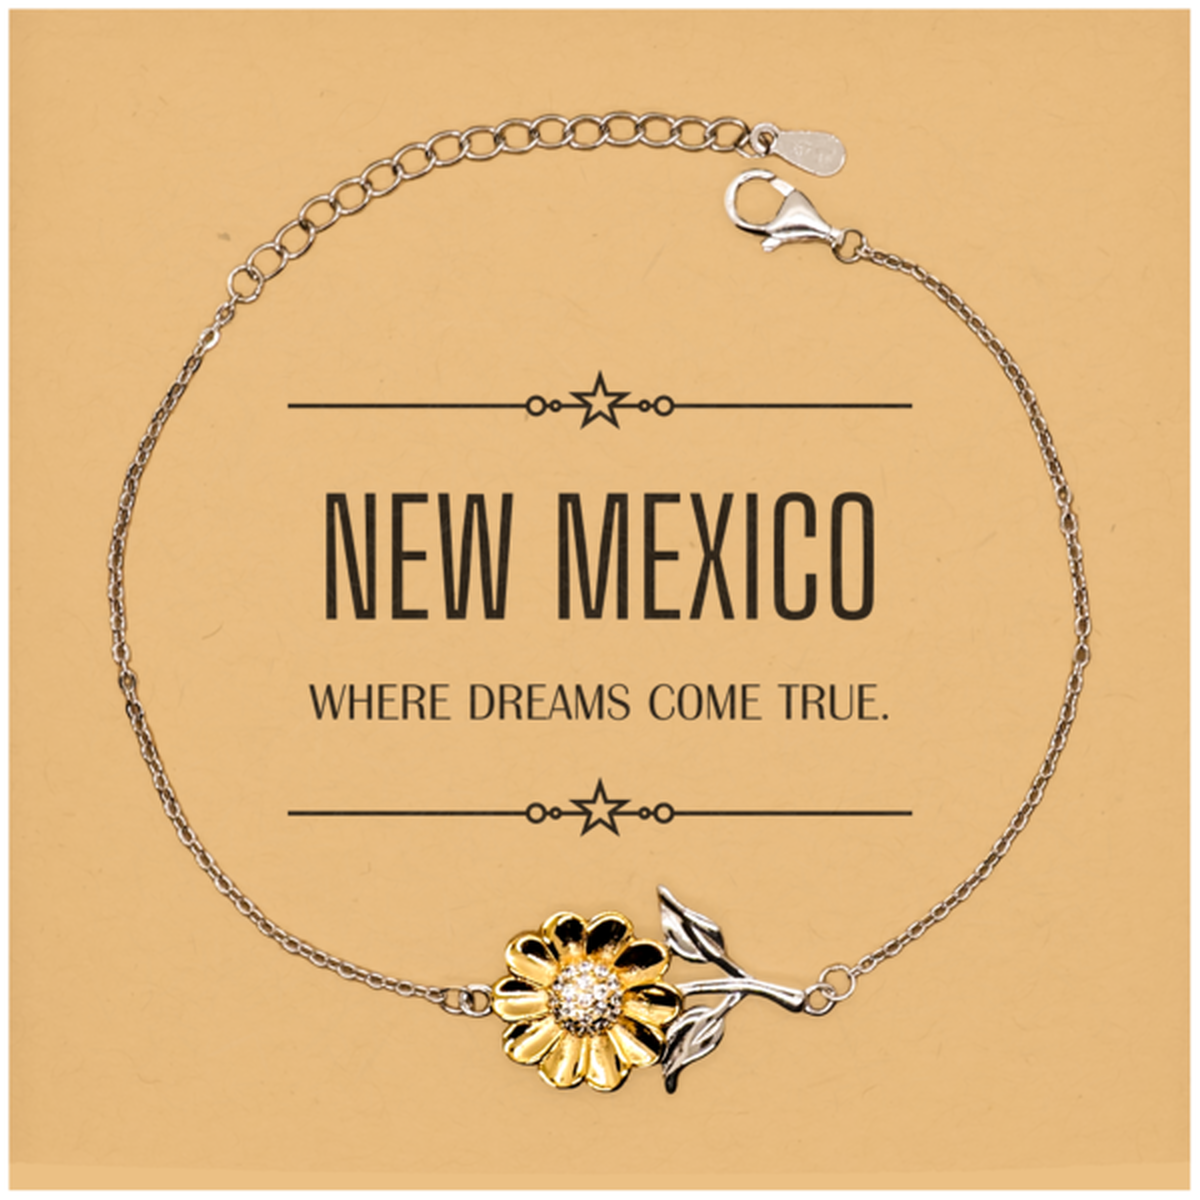 Love New Mexico State Sunflower Bracelet, New Mexico Where dreams come true, Birthday Christmas Inspirational Gifts For New Mexico Men, Women, Friends